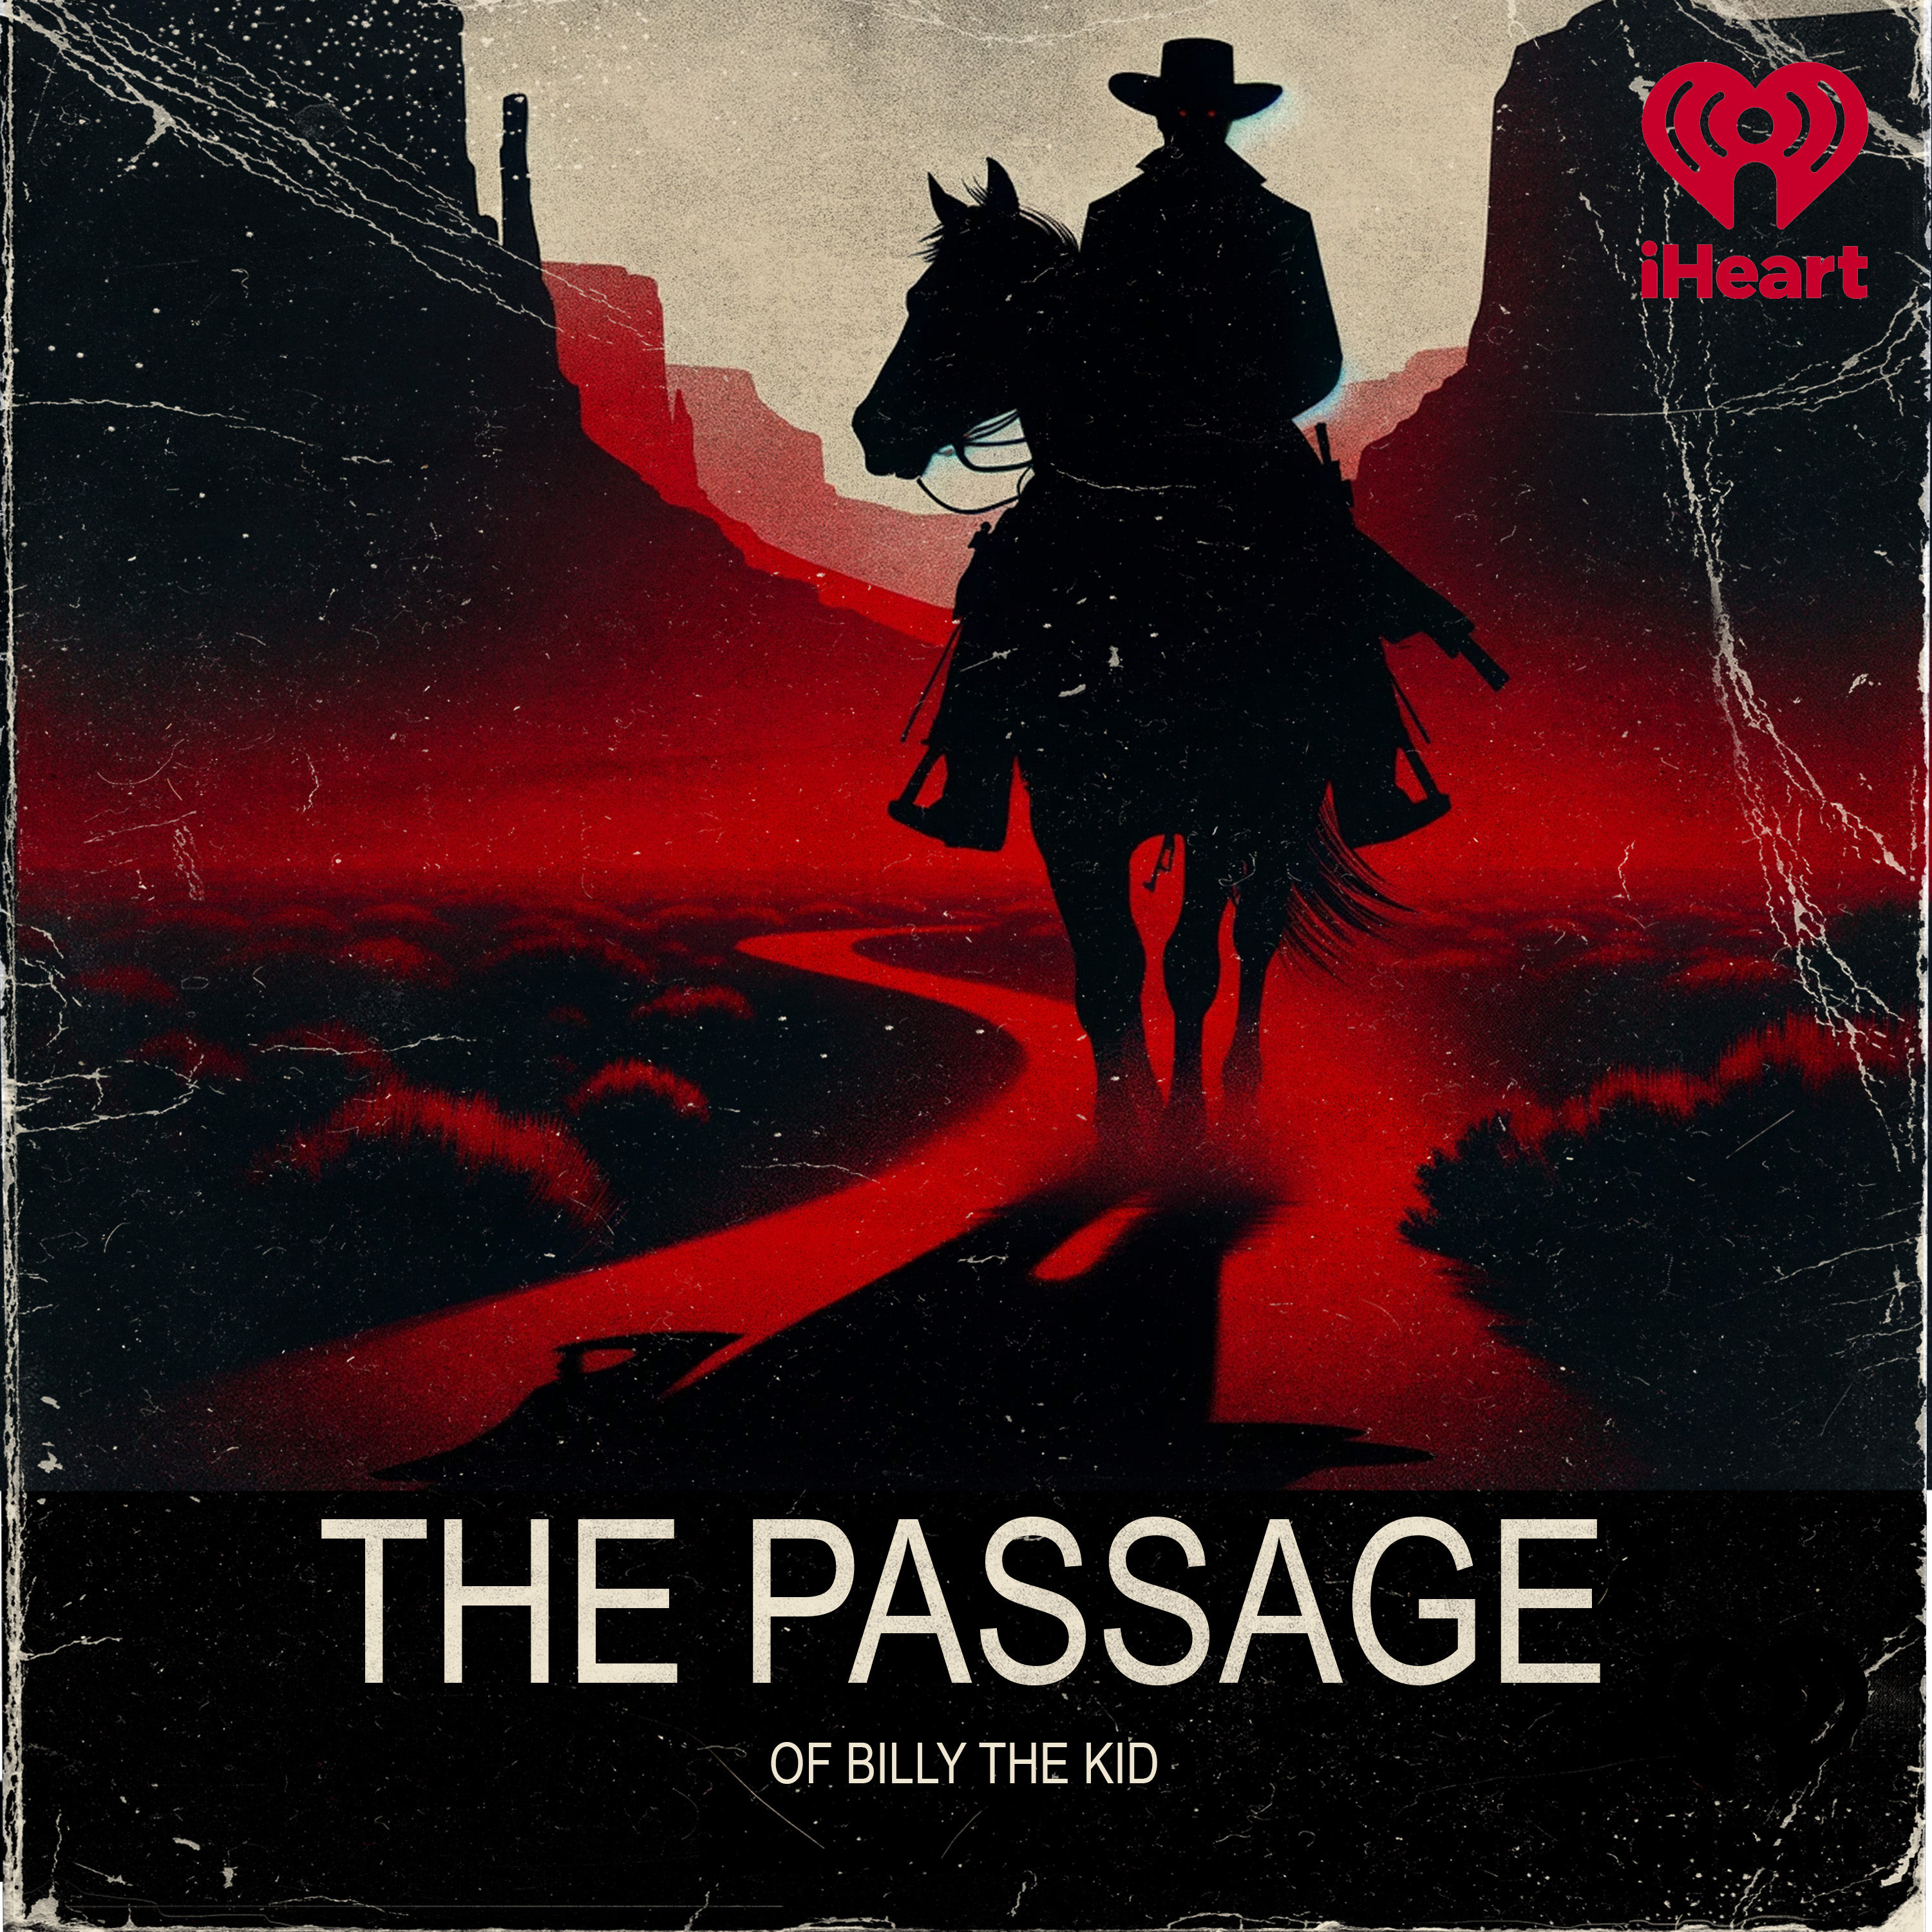 Episode 1: THE PASSAGE OF BILLY THE KID